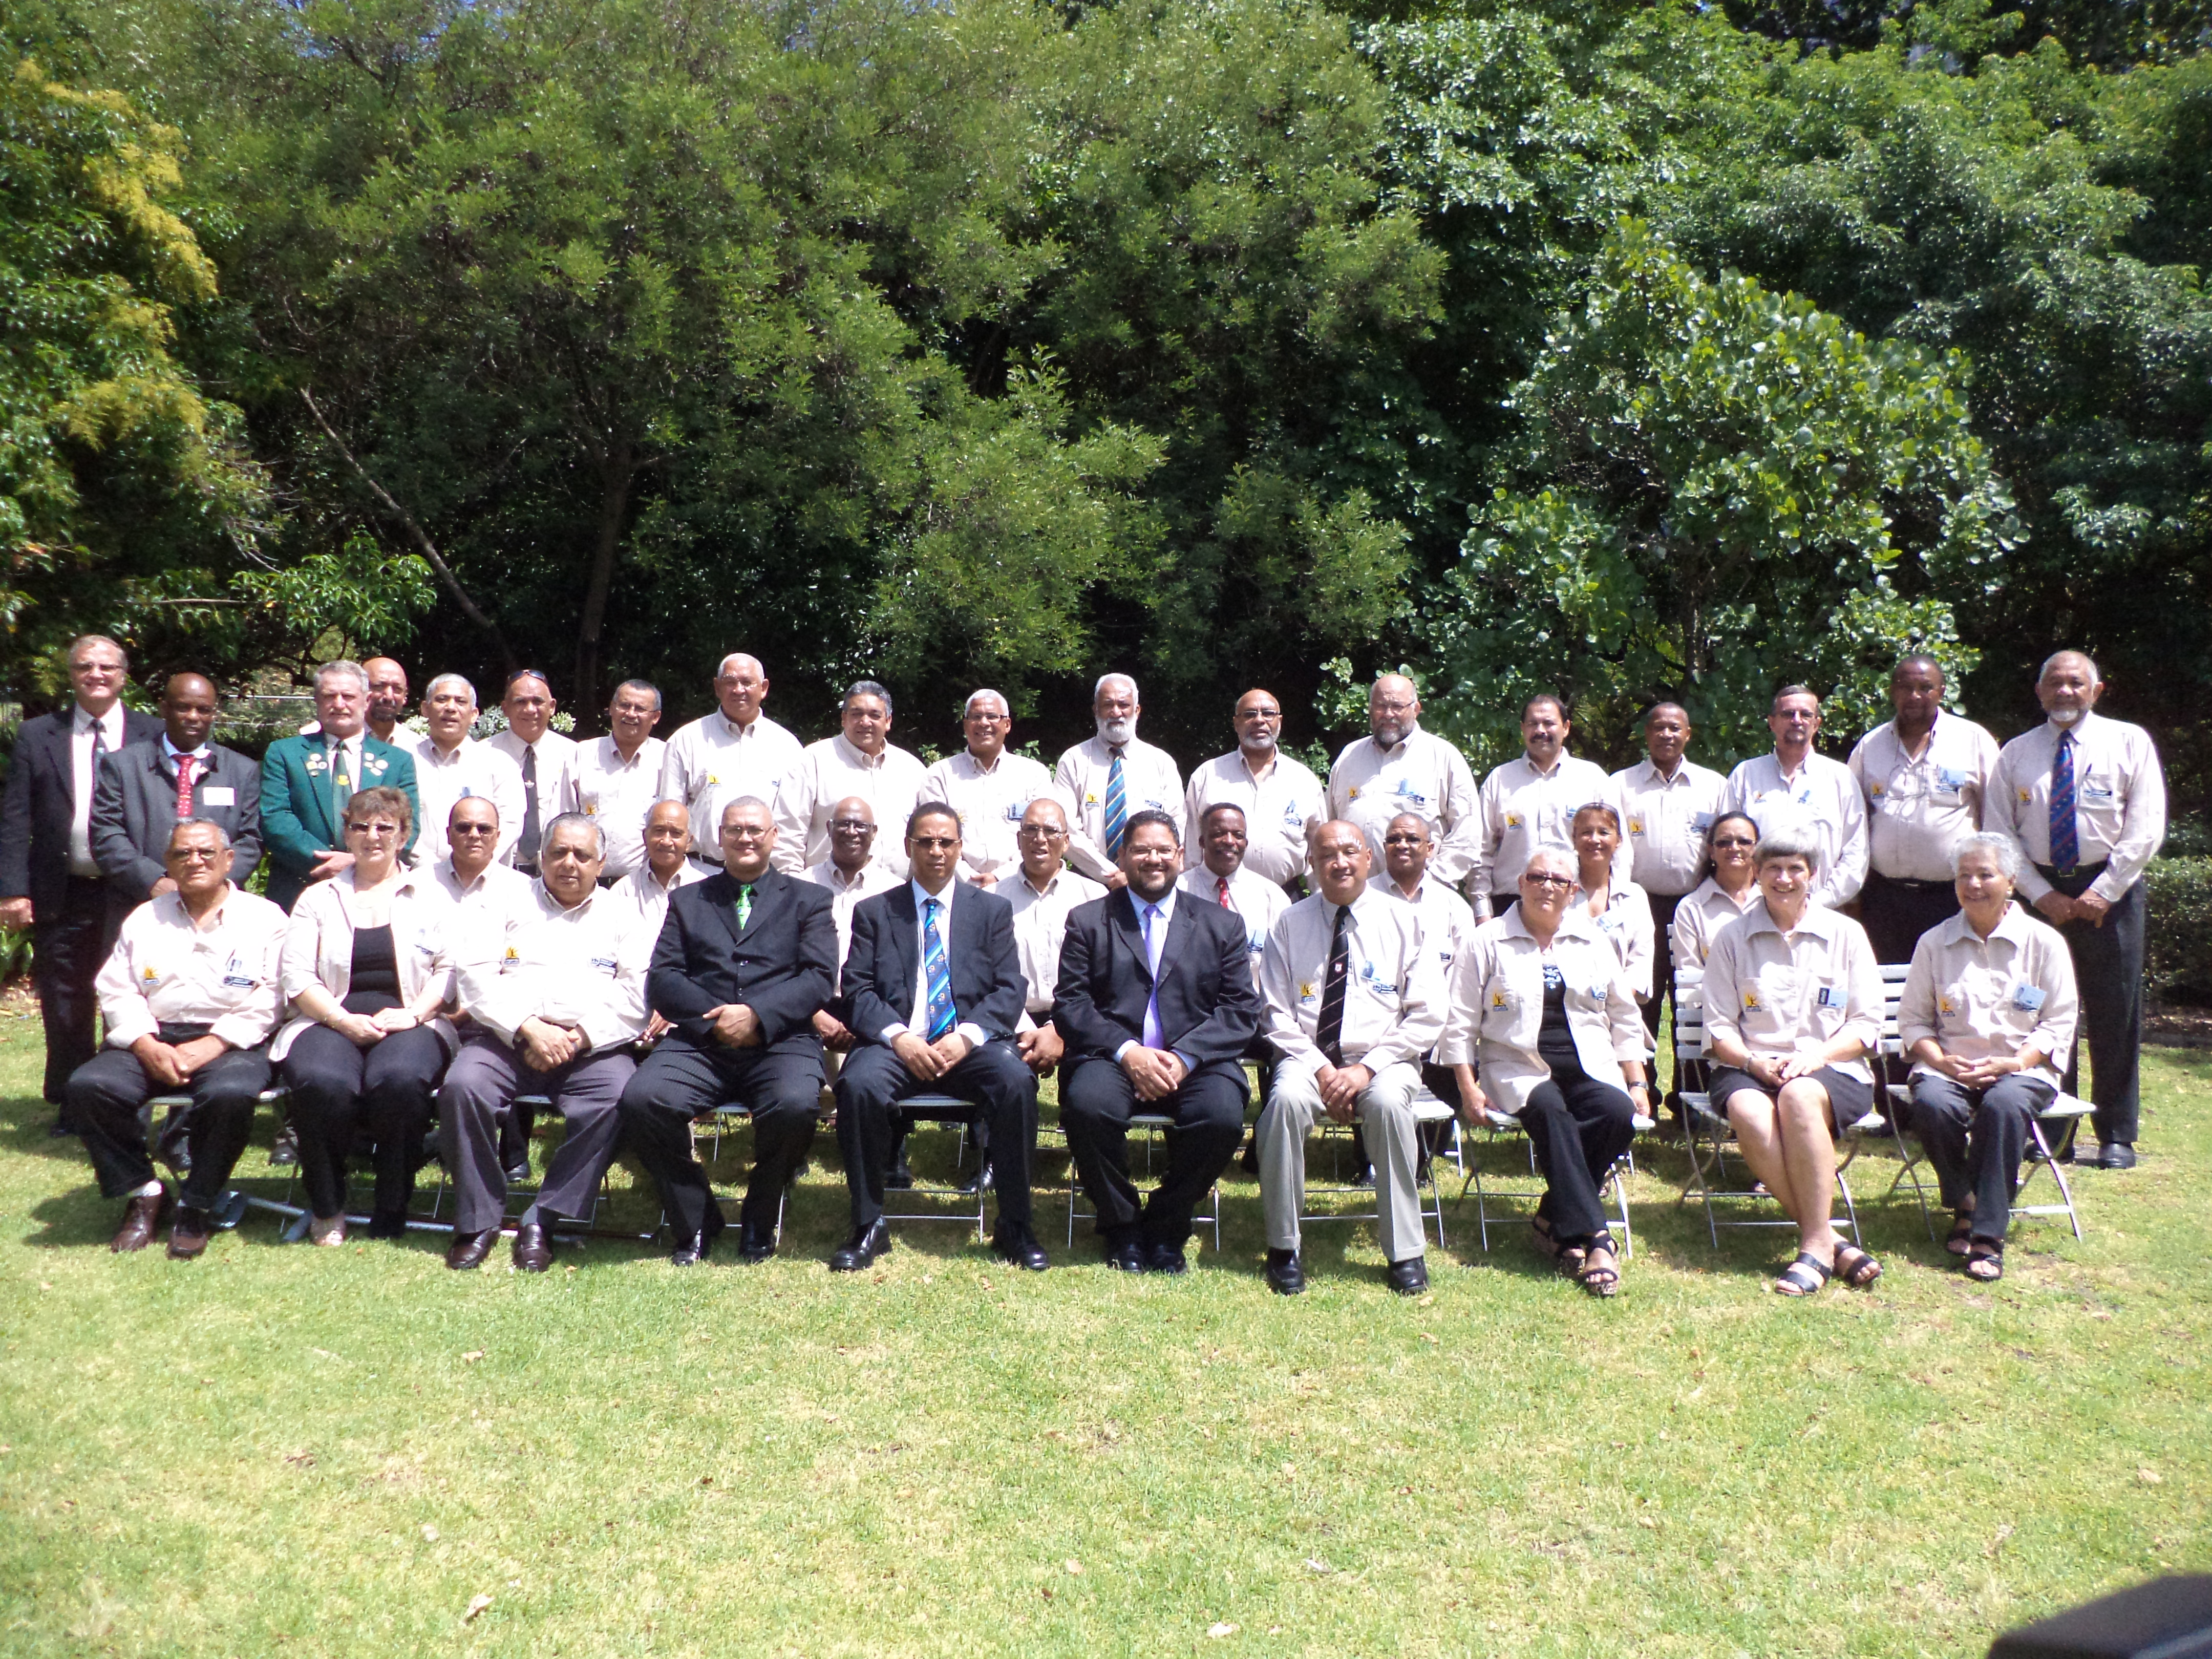 2012 Sport Legends with Minister Ivan Meyer(seated centre) and Head of Department of Cultural Affairs and Sport, Mr Brent Walters(seated centre).